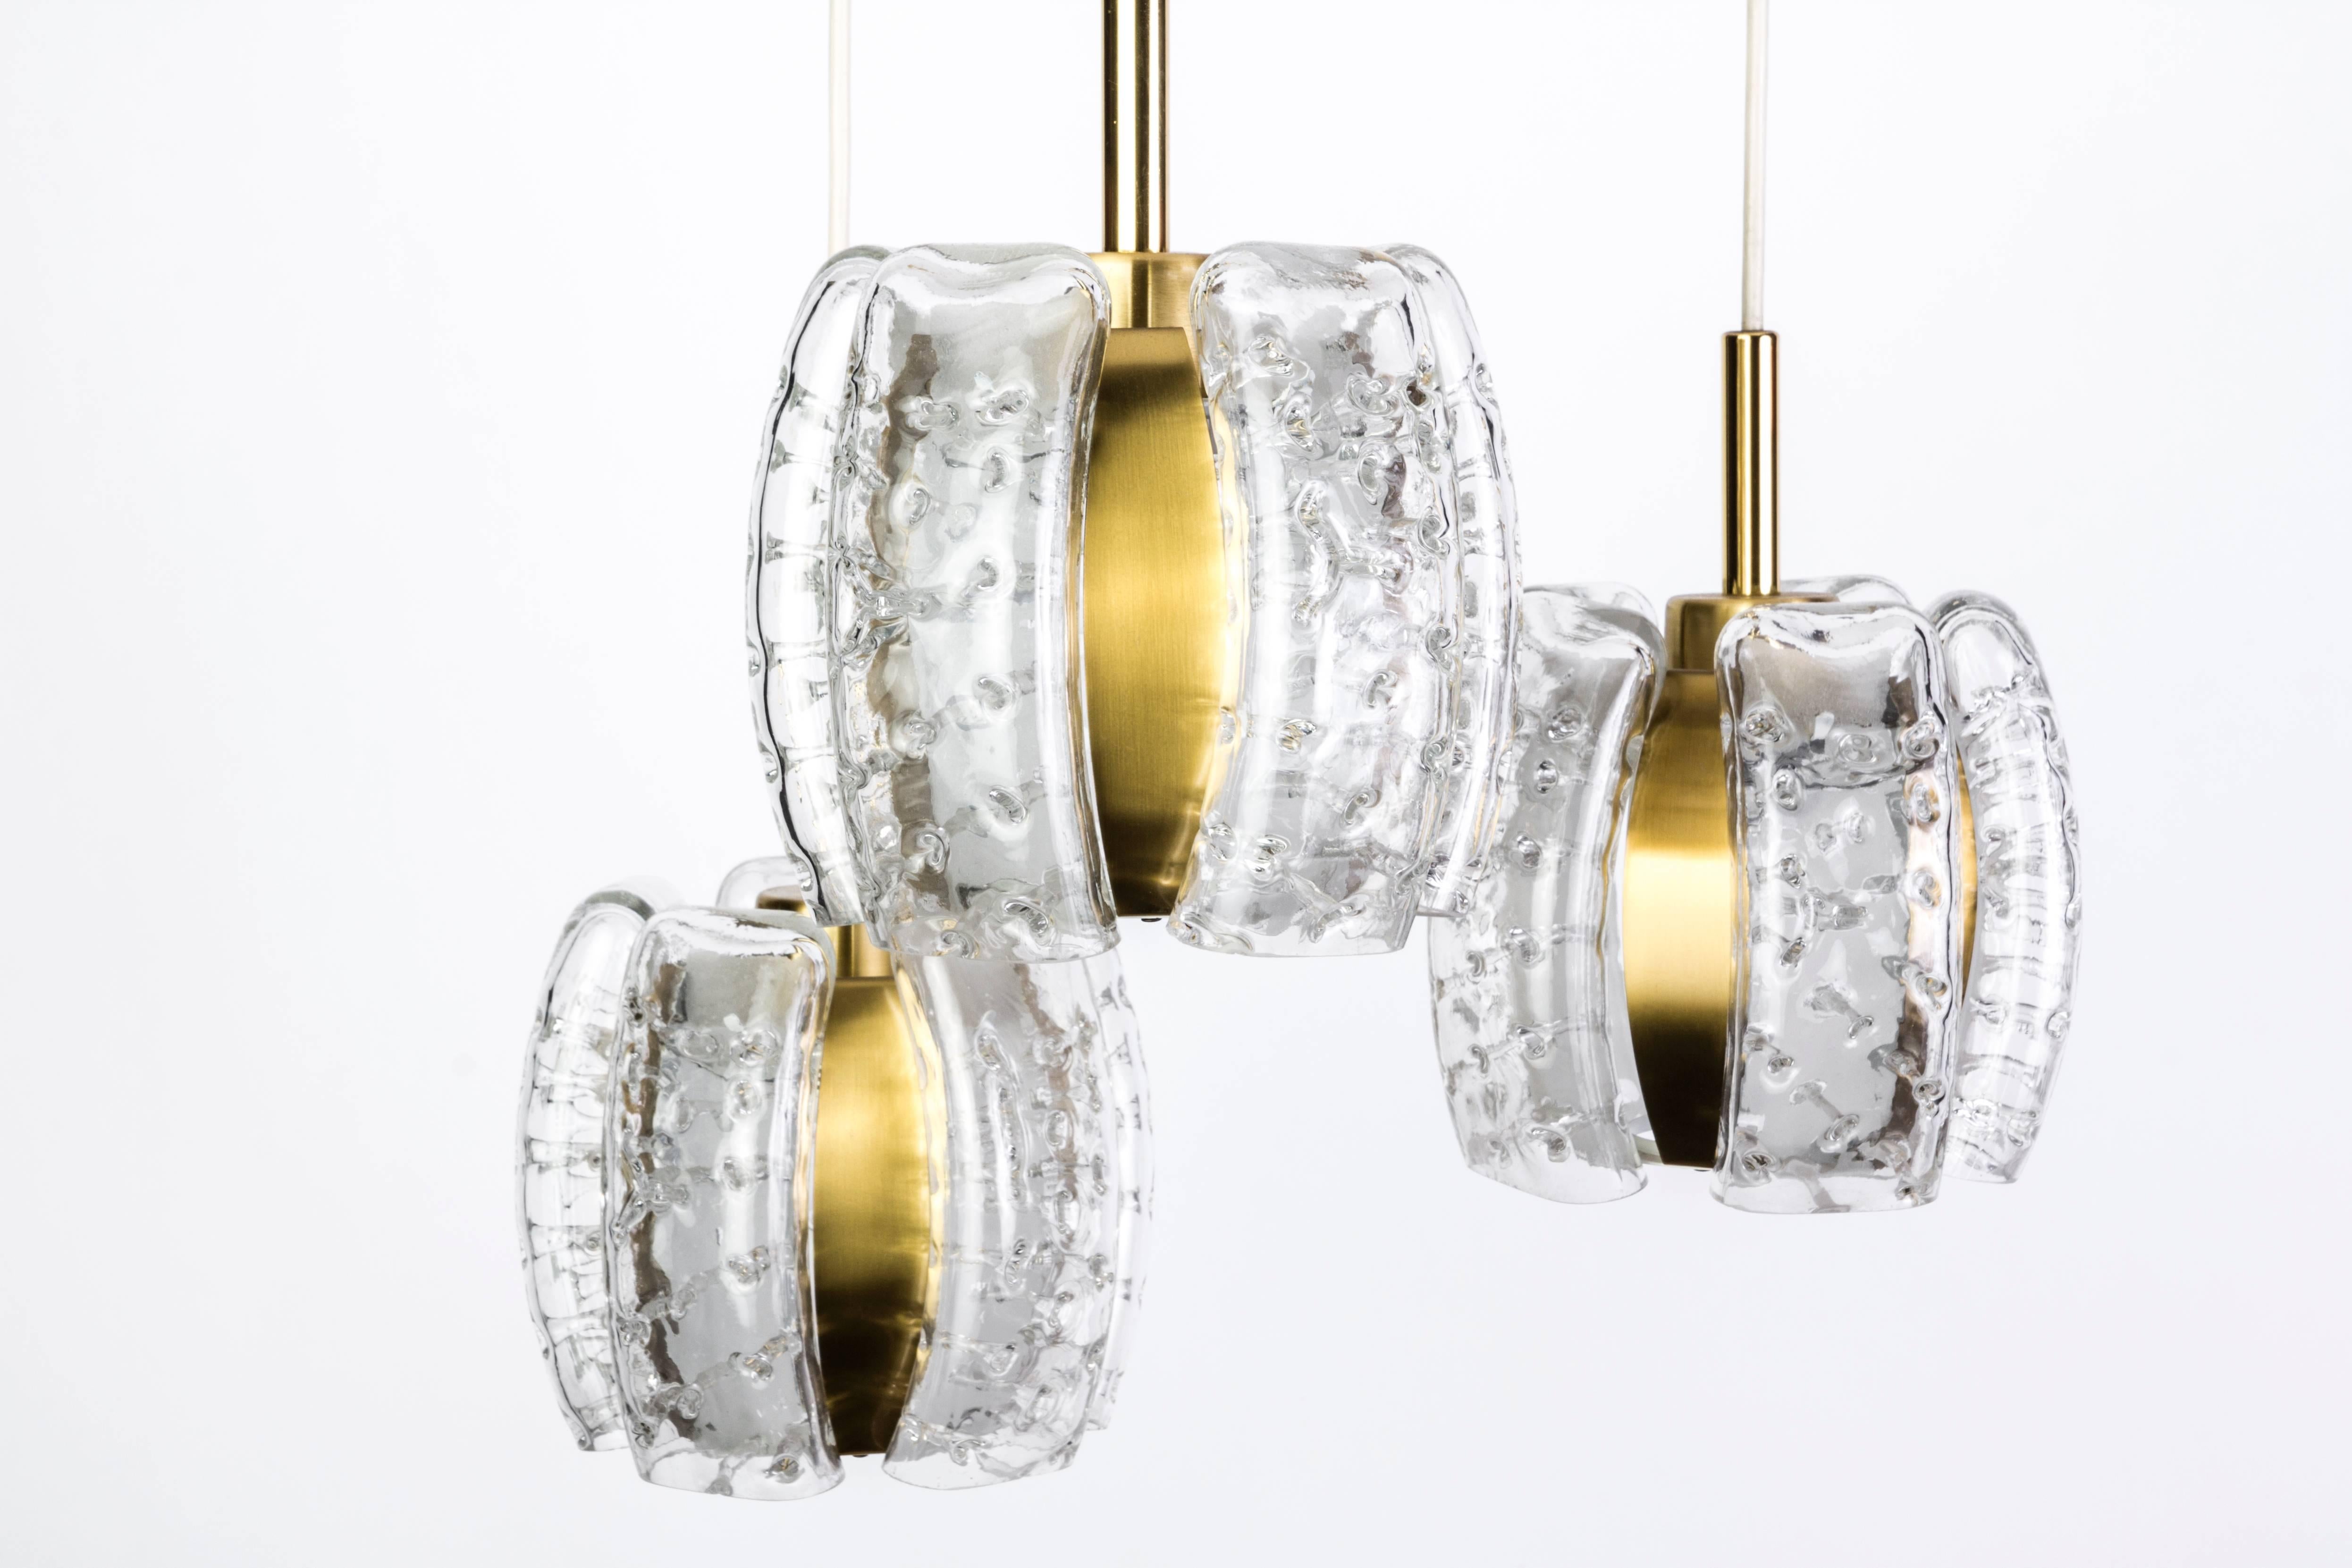 This stunning German chandelier was designed by Doria. It features cream enamel and brass detailed frame cascading into three octagonal form shades with textured bubble glass panels and brass accents.

Made in Germany, circa 1970.